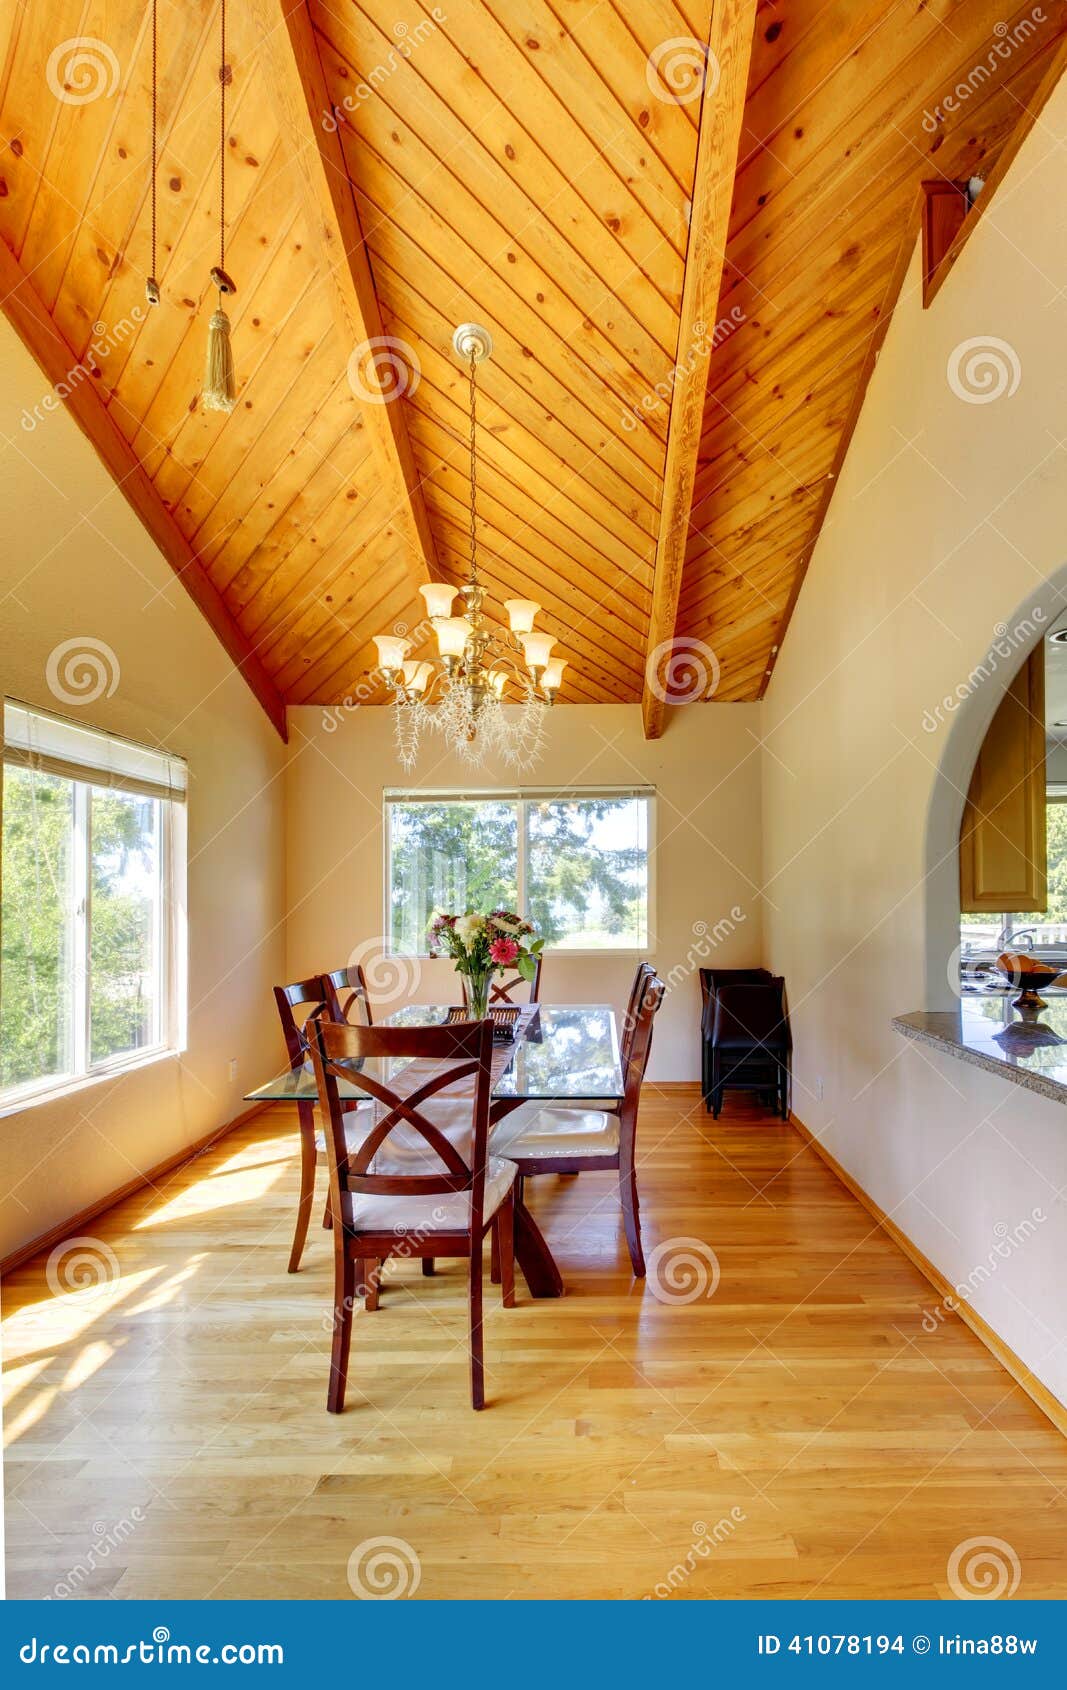 Beautiful Dining Area With High Vaulted Ceiling Stock Photo